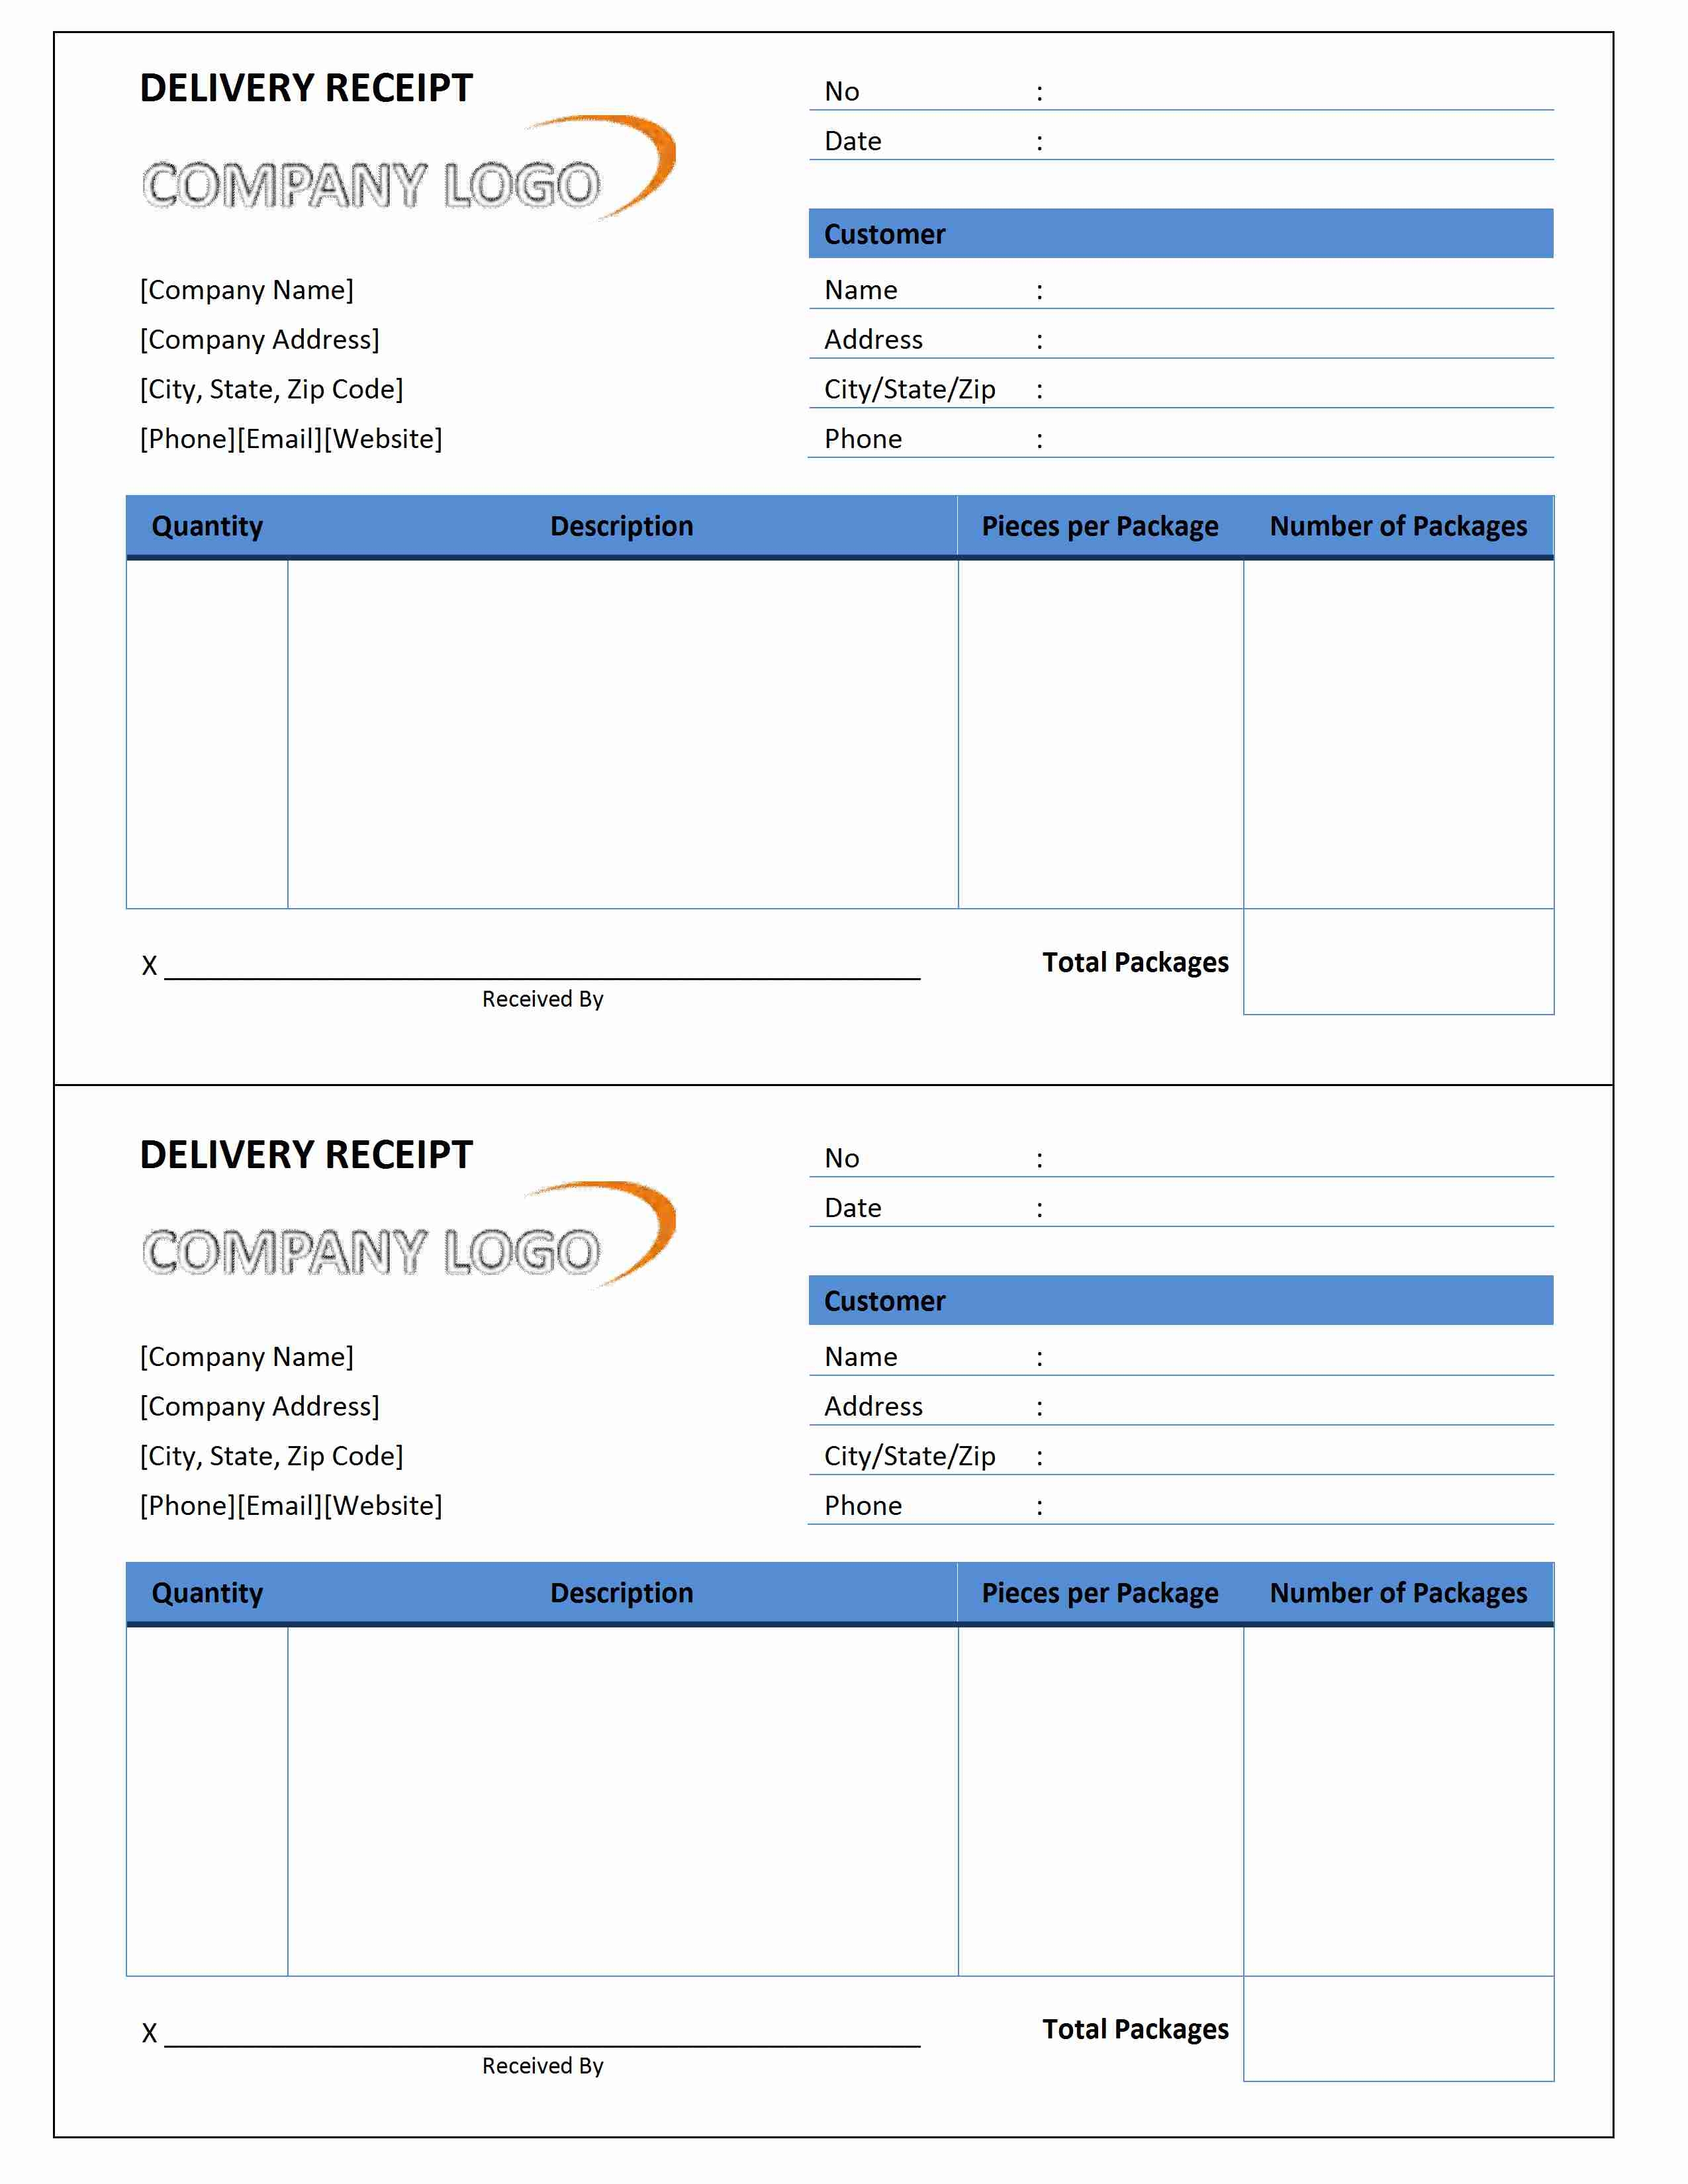 delivery invoice template delivery receipt | word templates | free word templates | ms word  2550 X 3300